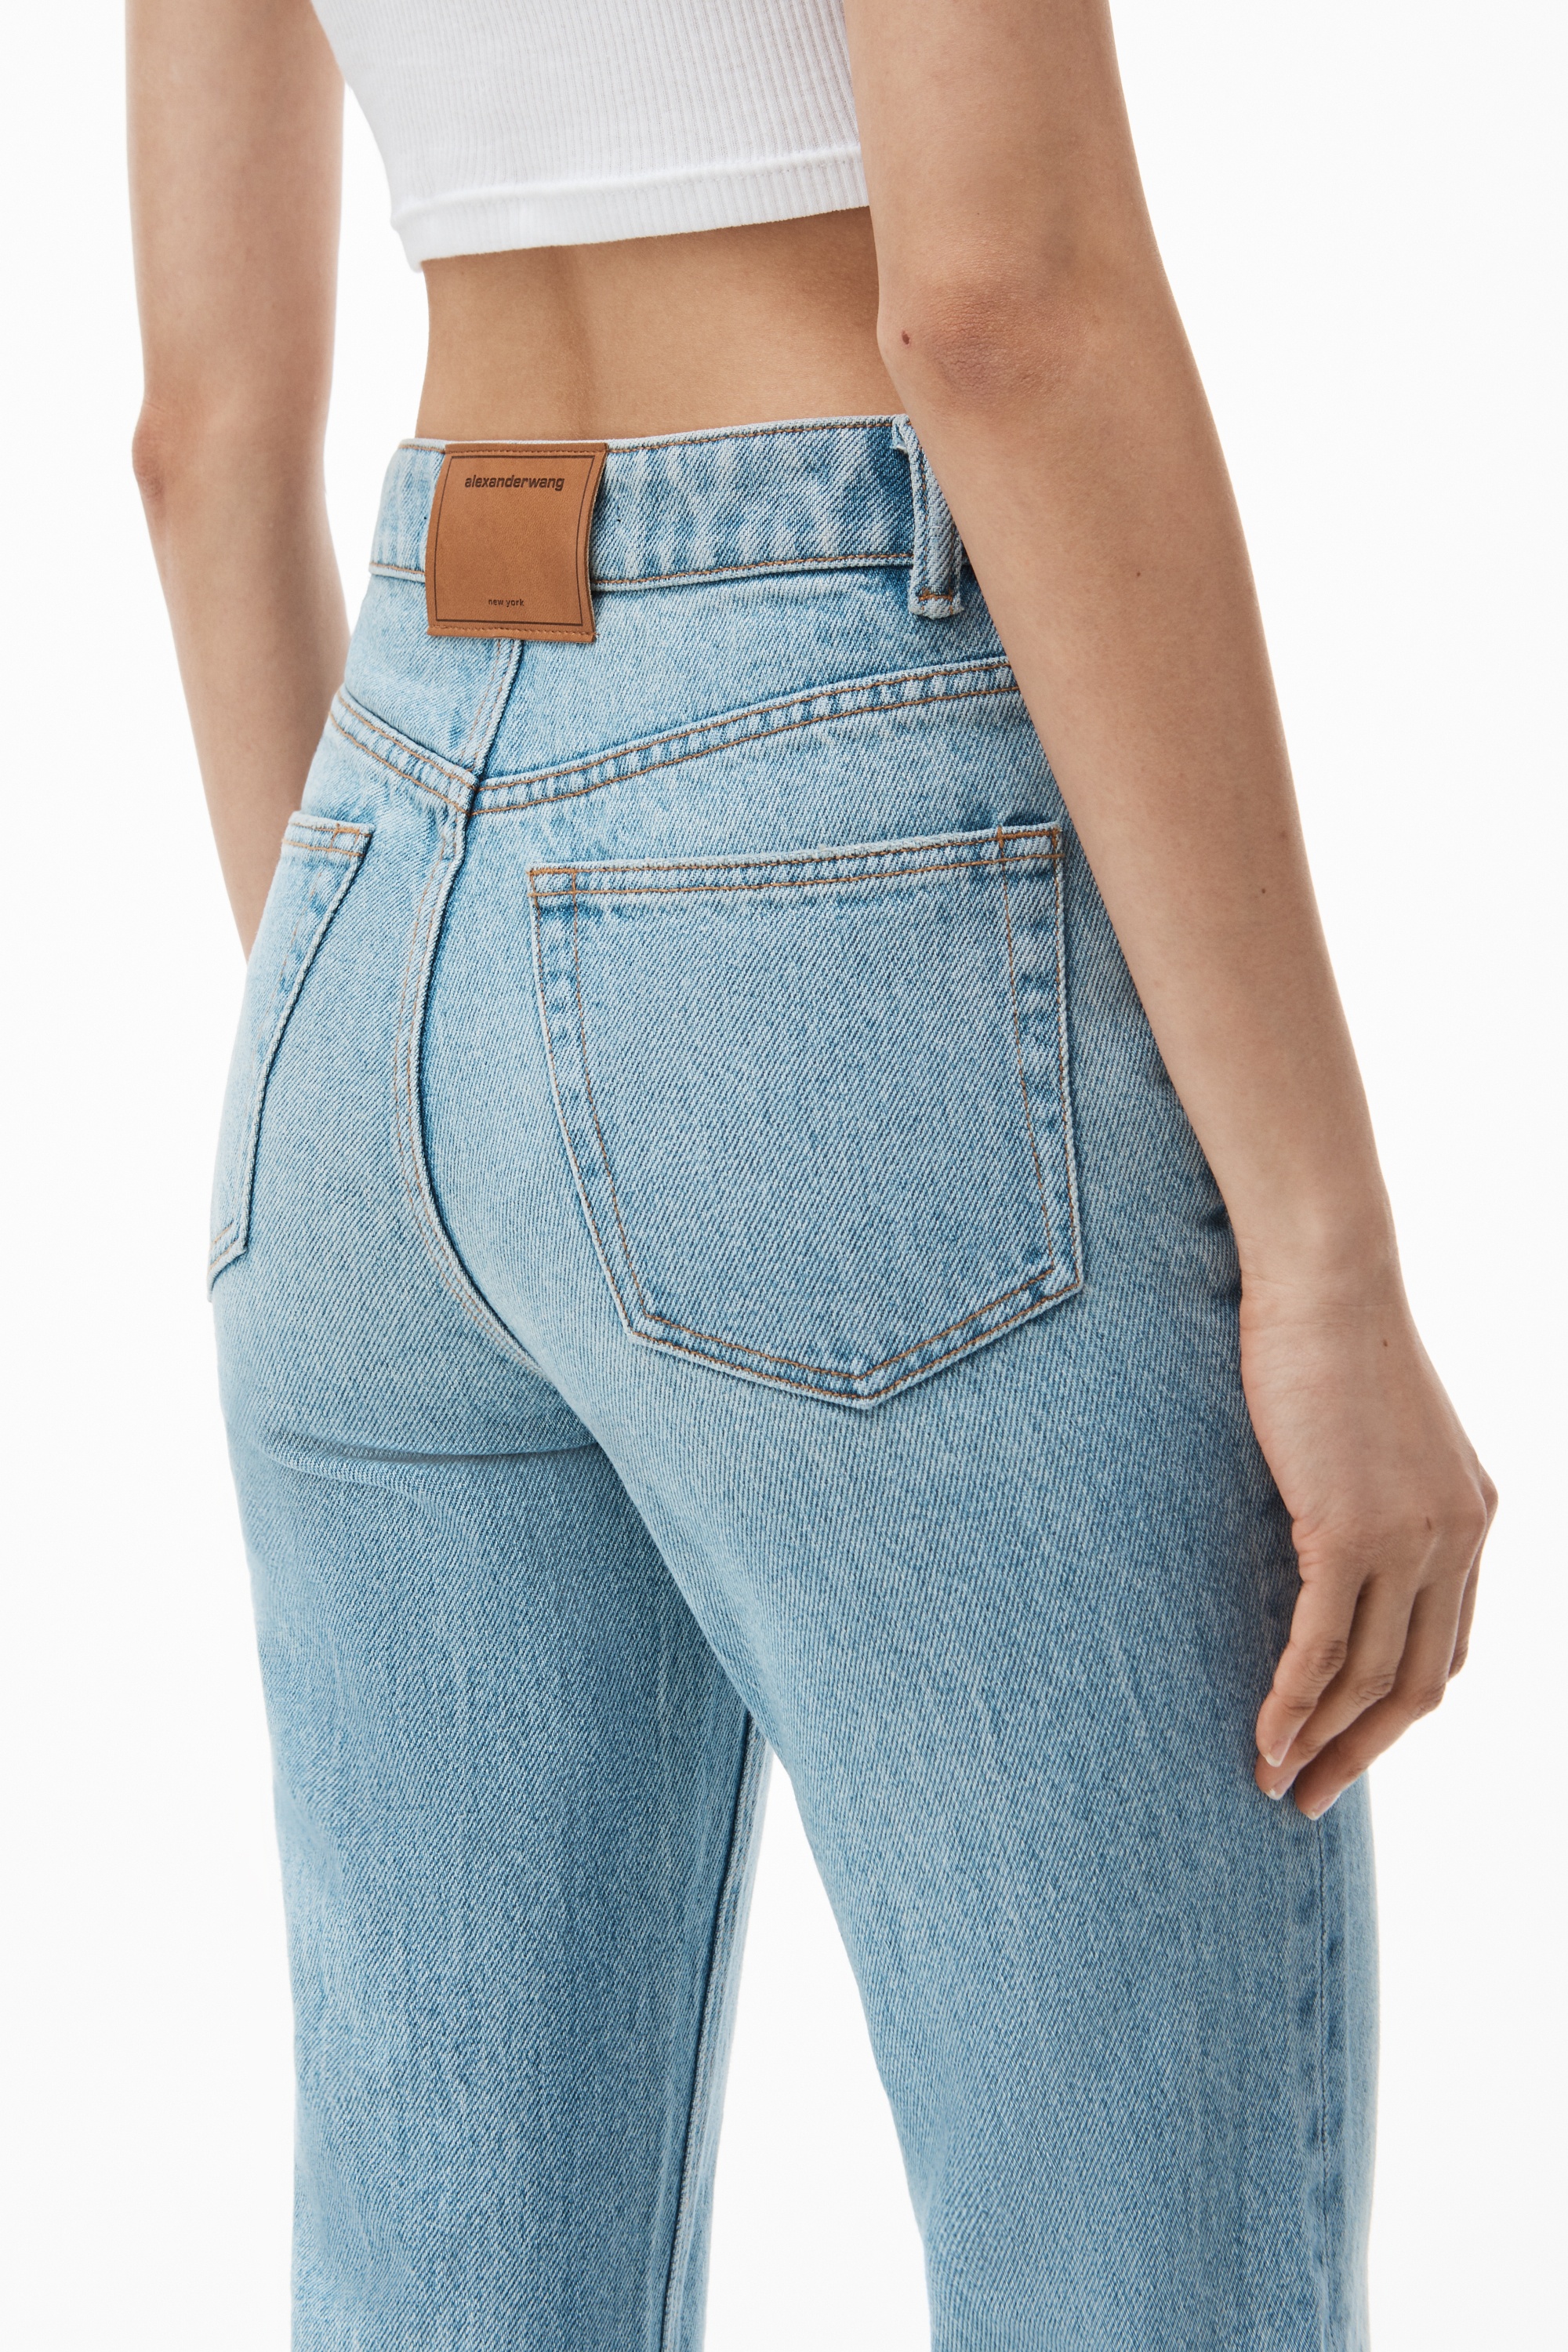 FLY HIGH-RISE STACKED JEAN IN DENIM - 5